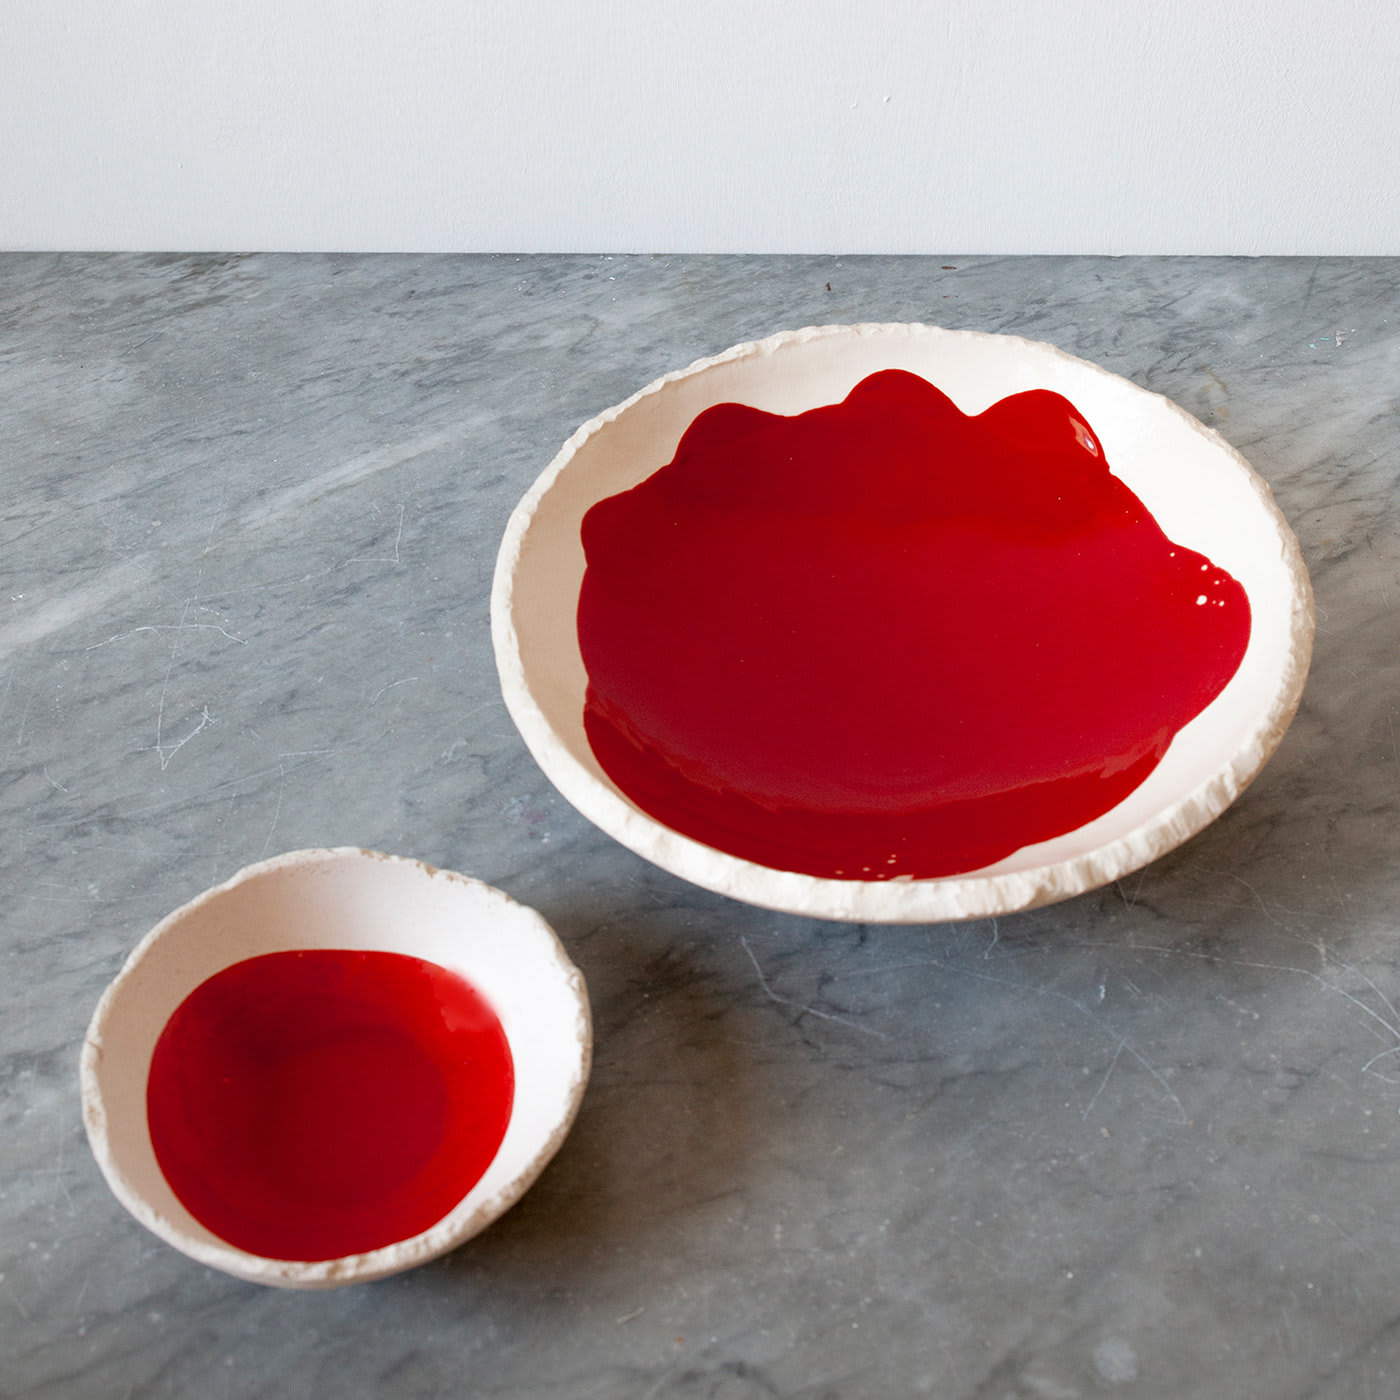 Gusci Large Red Bowl - Gianfranco Conte